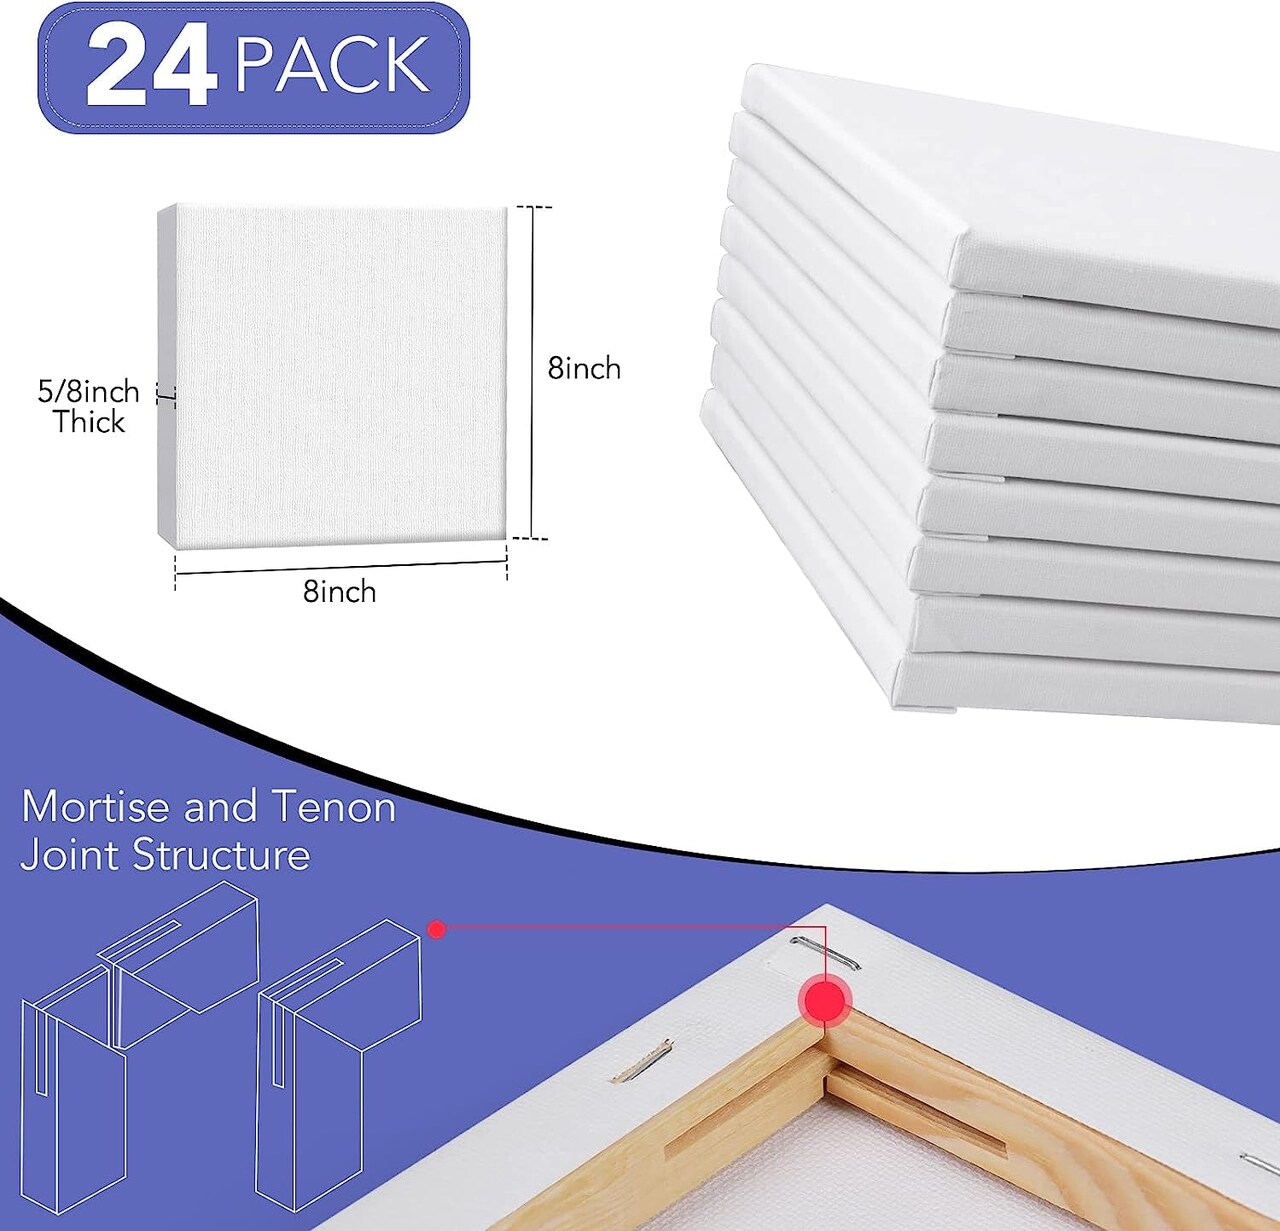 Stretched Canvases for Painting, 8X8, Pack of 24, Primed Acid-Free, 5/8  Inch Thick Wood Frame Blank Canvas, Art Canvases for Beginners, Artists for  Oil Paint,Acrylic Paint, Pouring Painting.